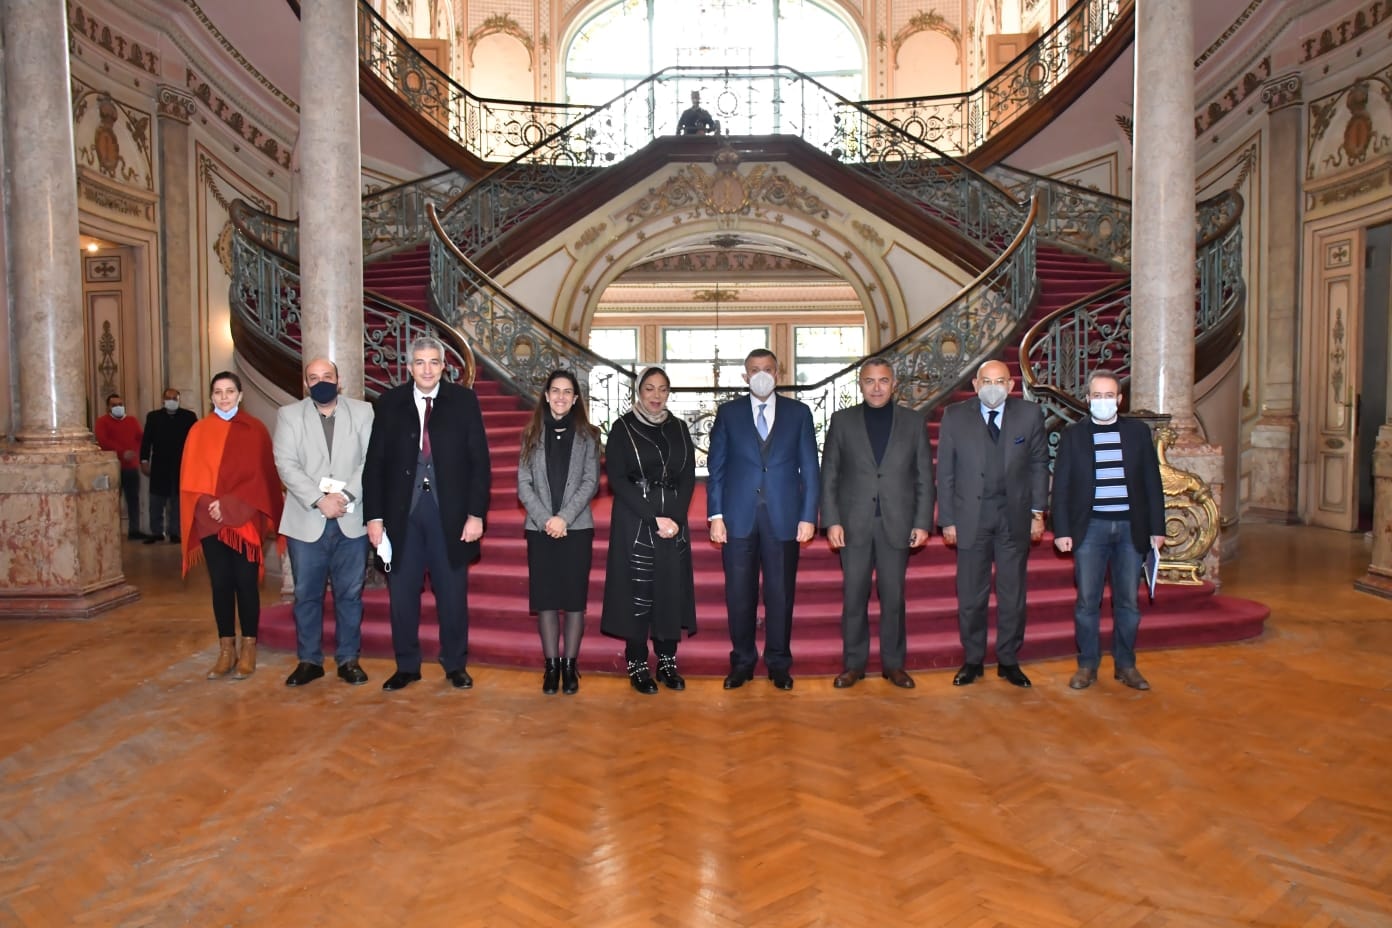 The President of Ain Shams University meets the Chairman of the Board of Directors of Crédit Agricole Egypt and the Chairperson of the Board of Trustees of Education First Foundation